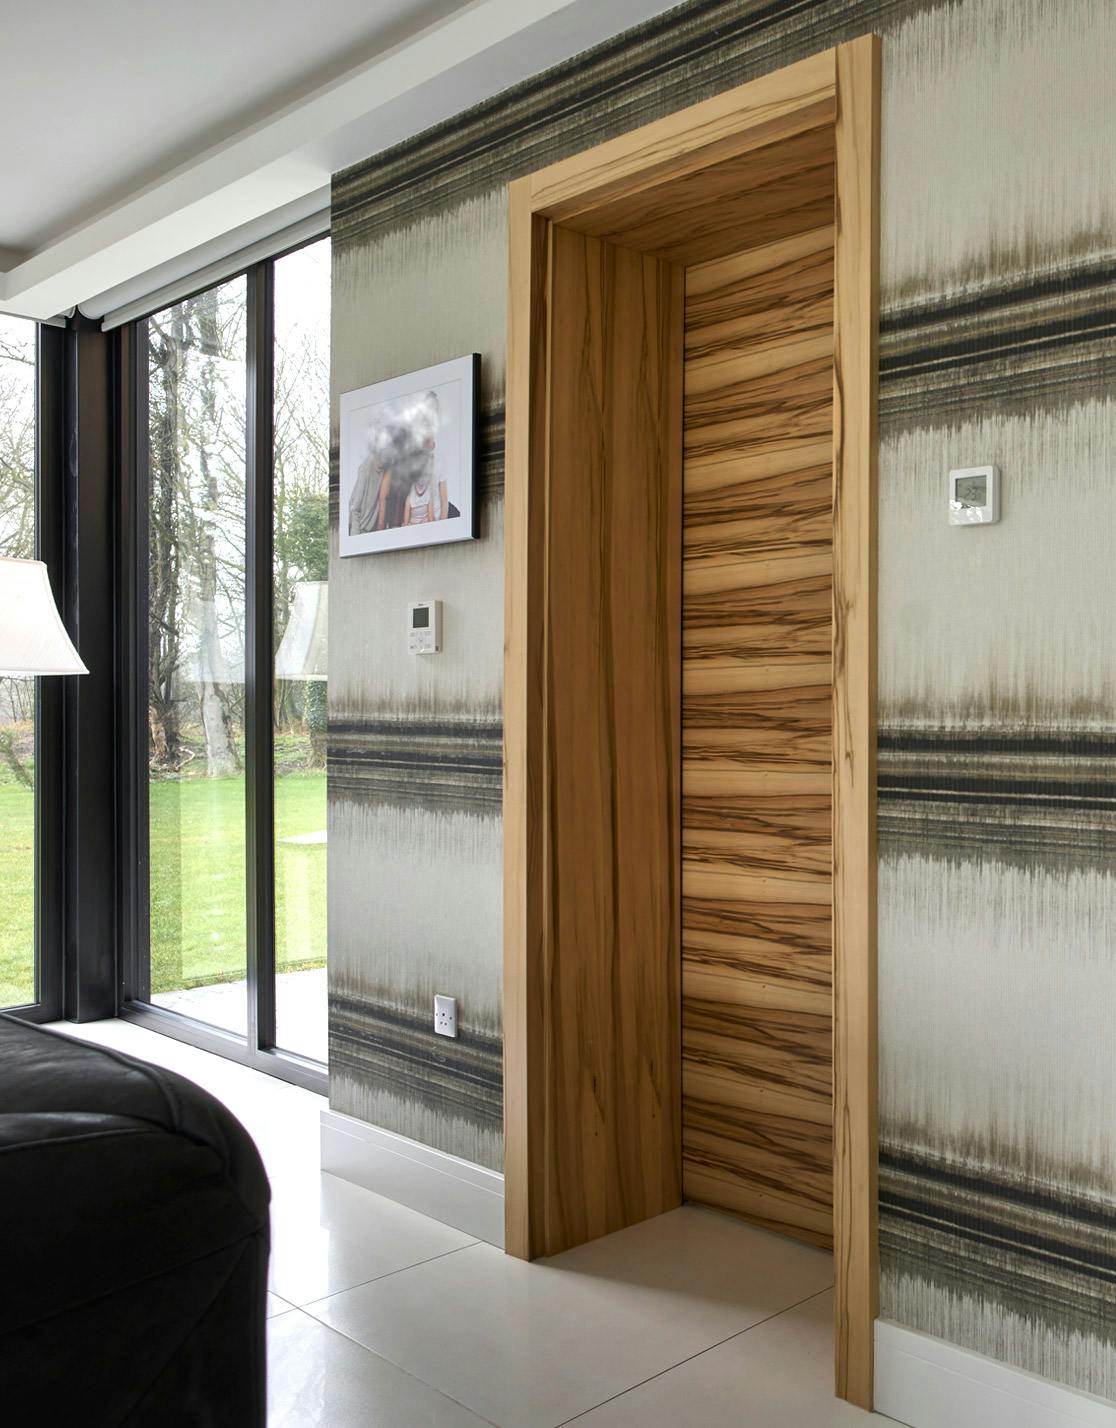 Modern lounge with a made-to-measure pre-hung door set from Deuren - Trem H style in Satin walnut finish with lever handles. Demonstrates Deuren's capability to make deep door frames.